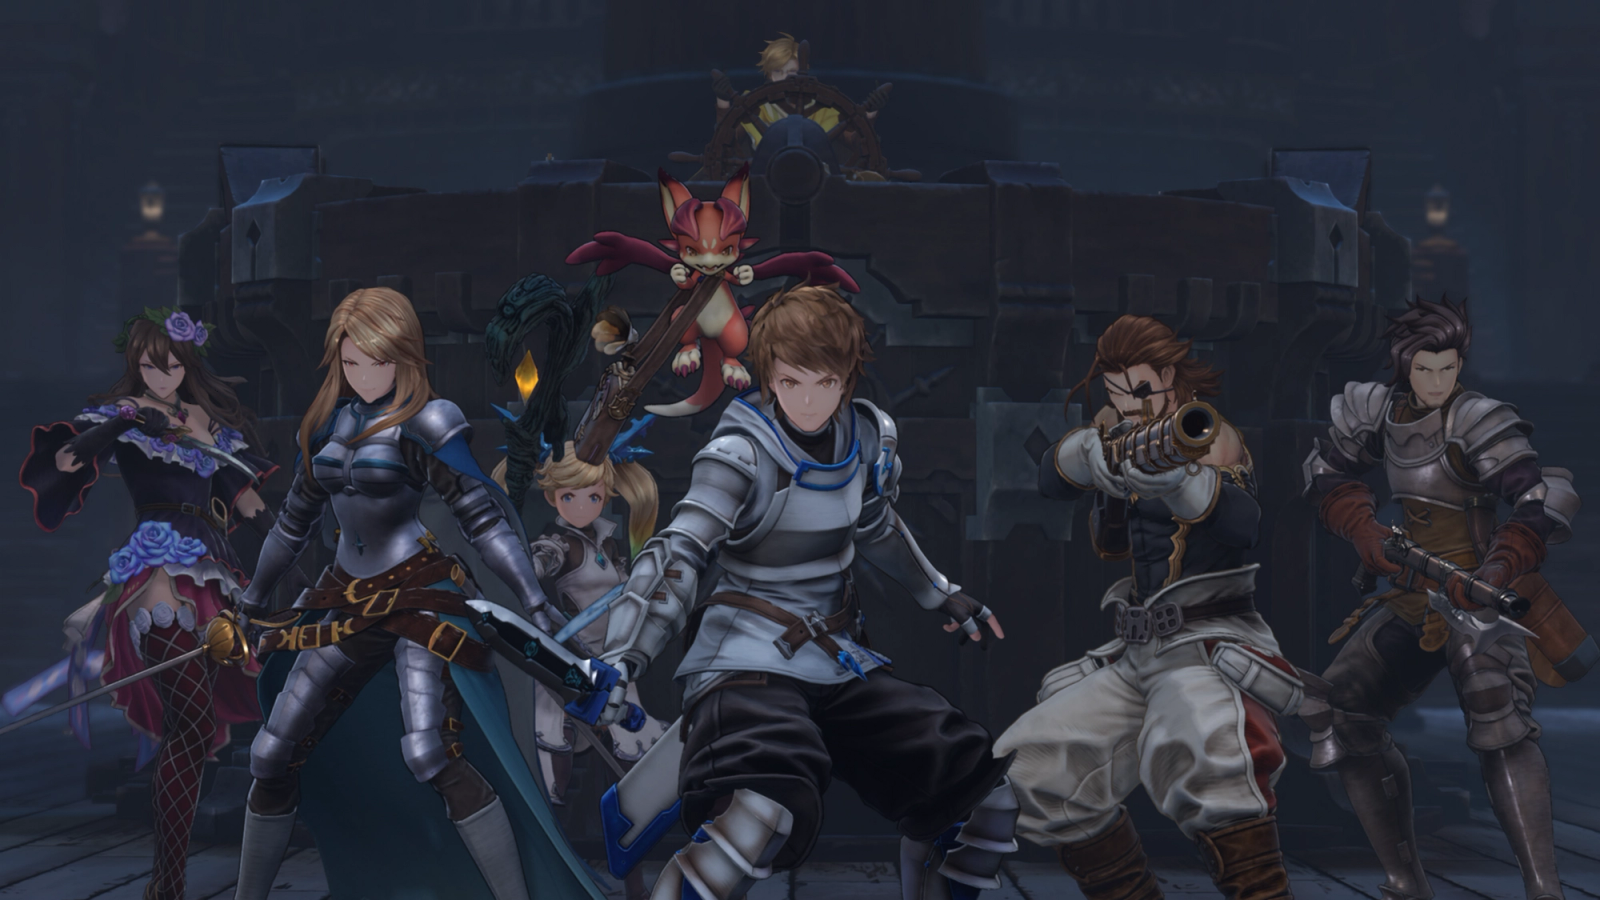 granblue fantasy relink character crew assembled together